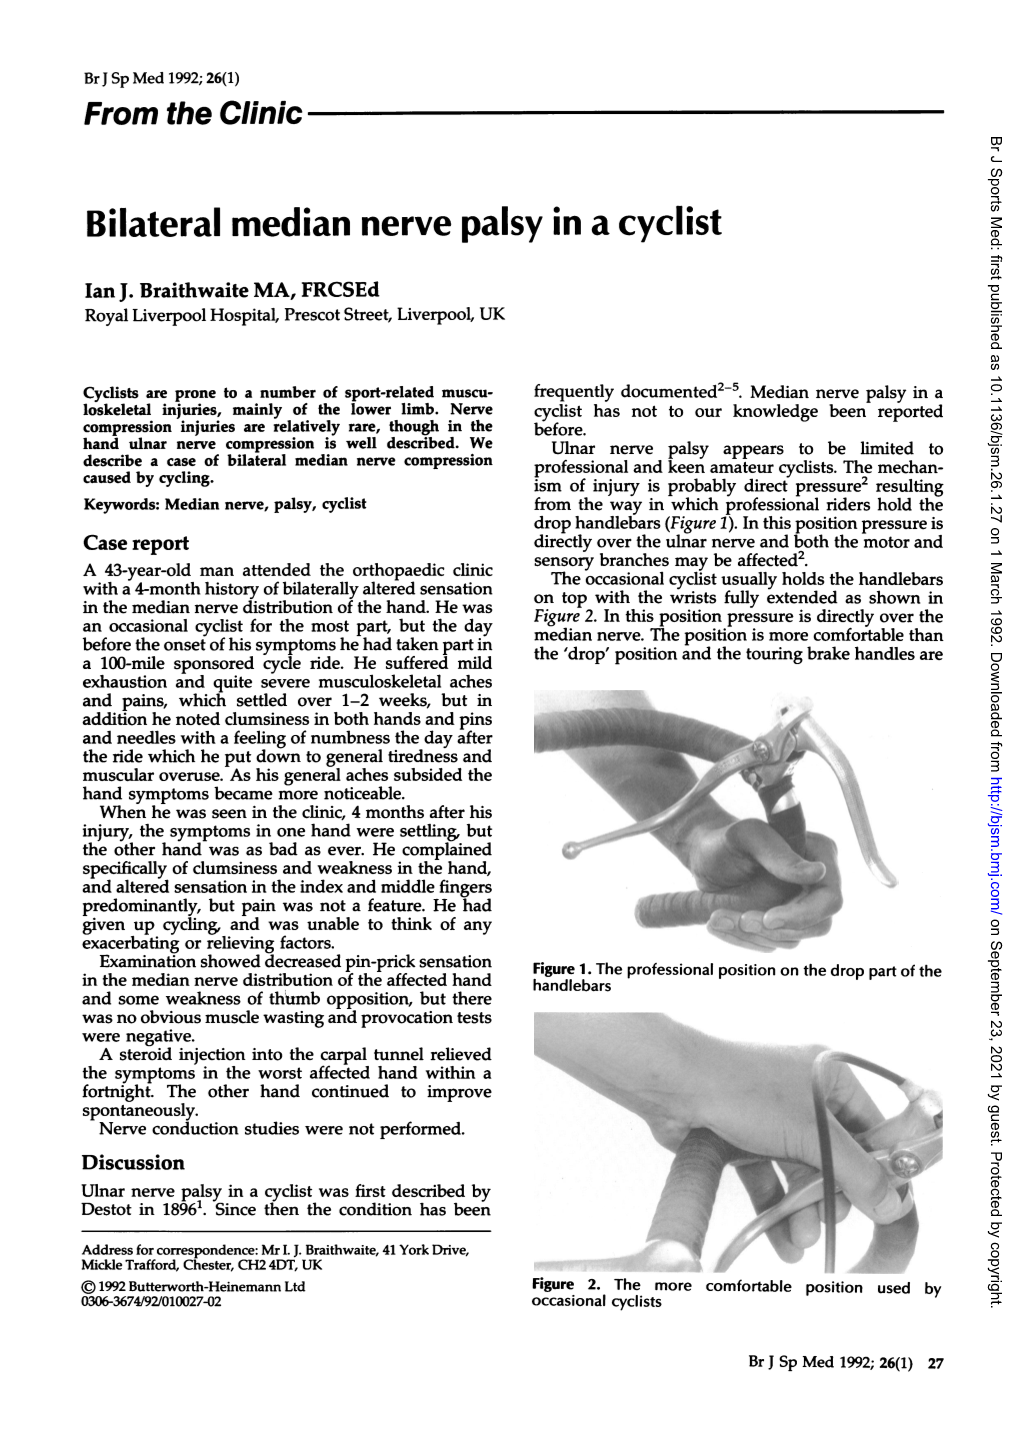 Bilateral Median Nerve Palsy in a Cyclist